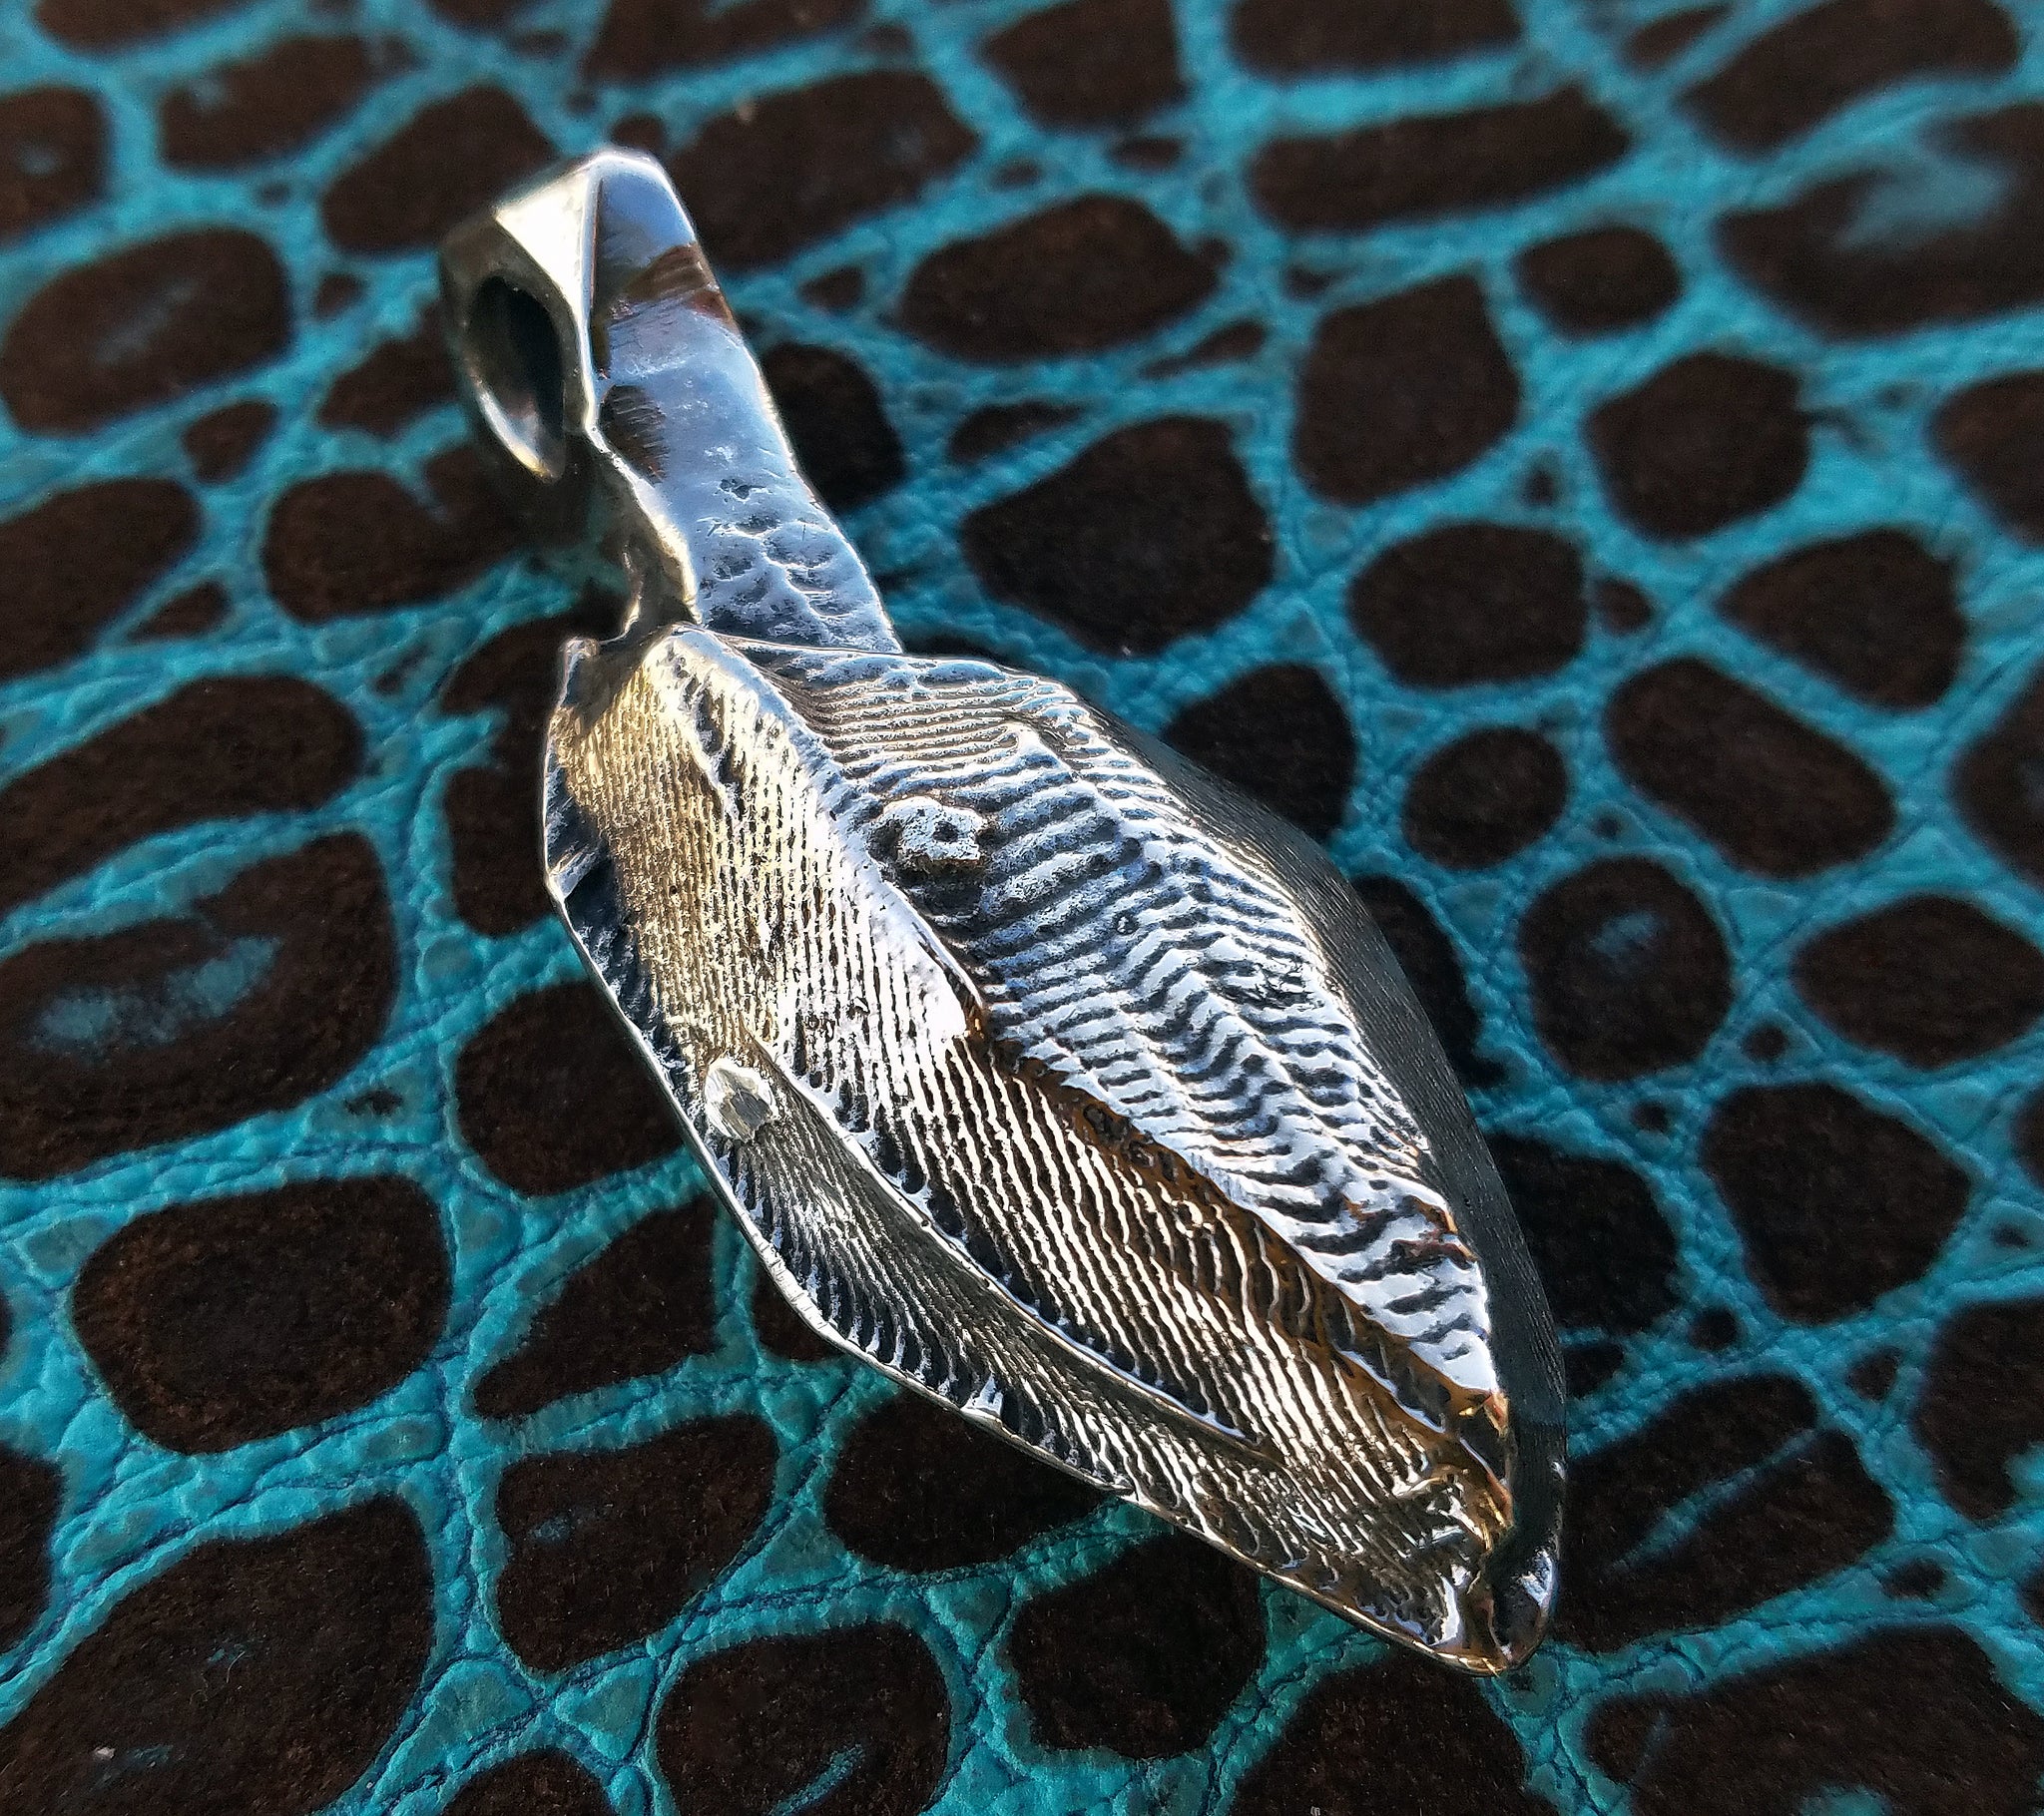 'Alien Seed' Hand-carved Hand-poured Cuttlefish Pendant #1 by Phantom